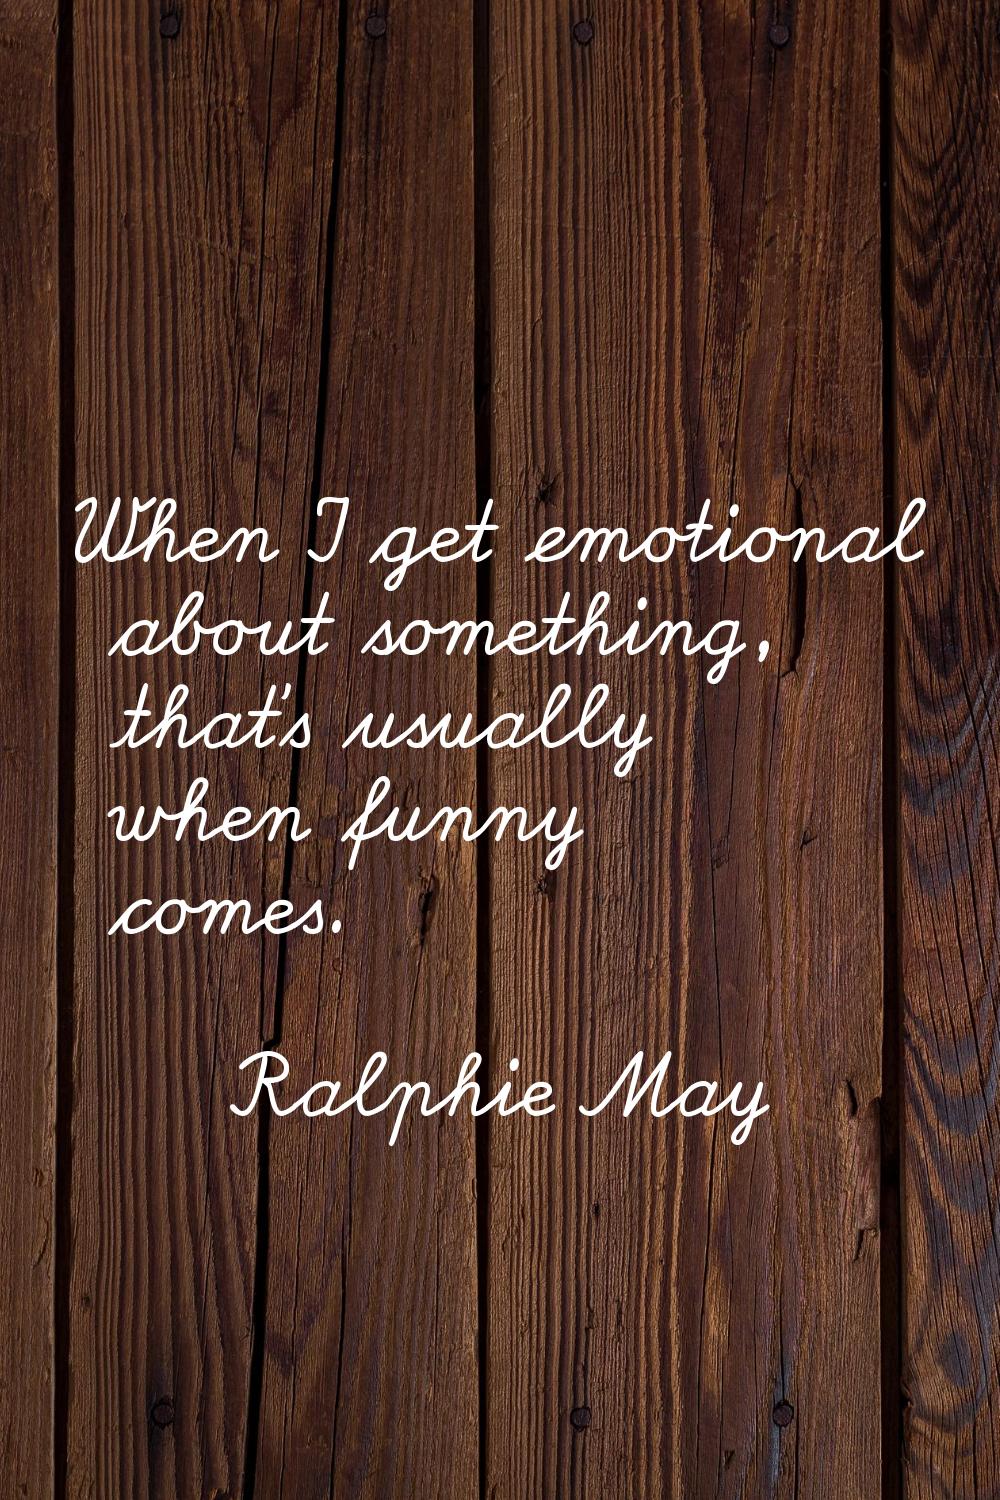 When I get emotional about something, that's usually when funny comes.